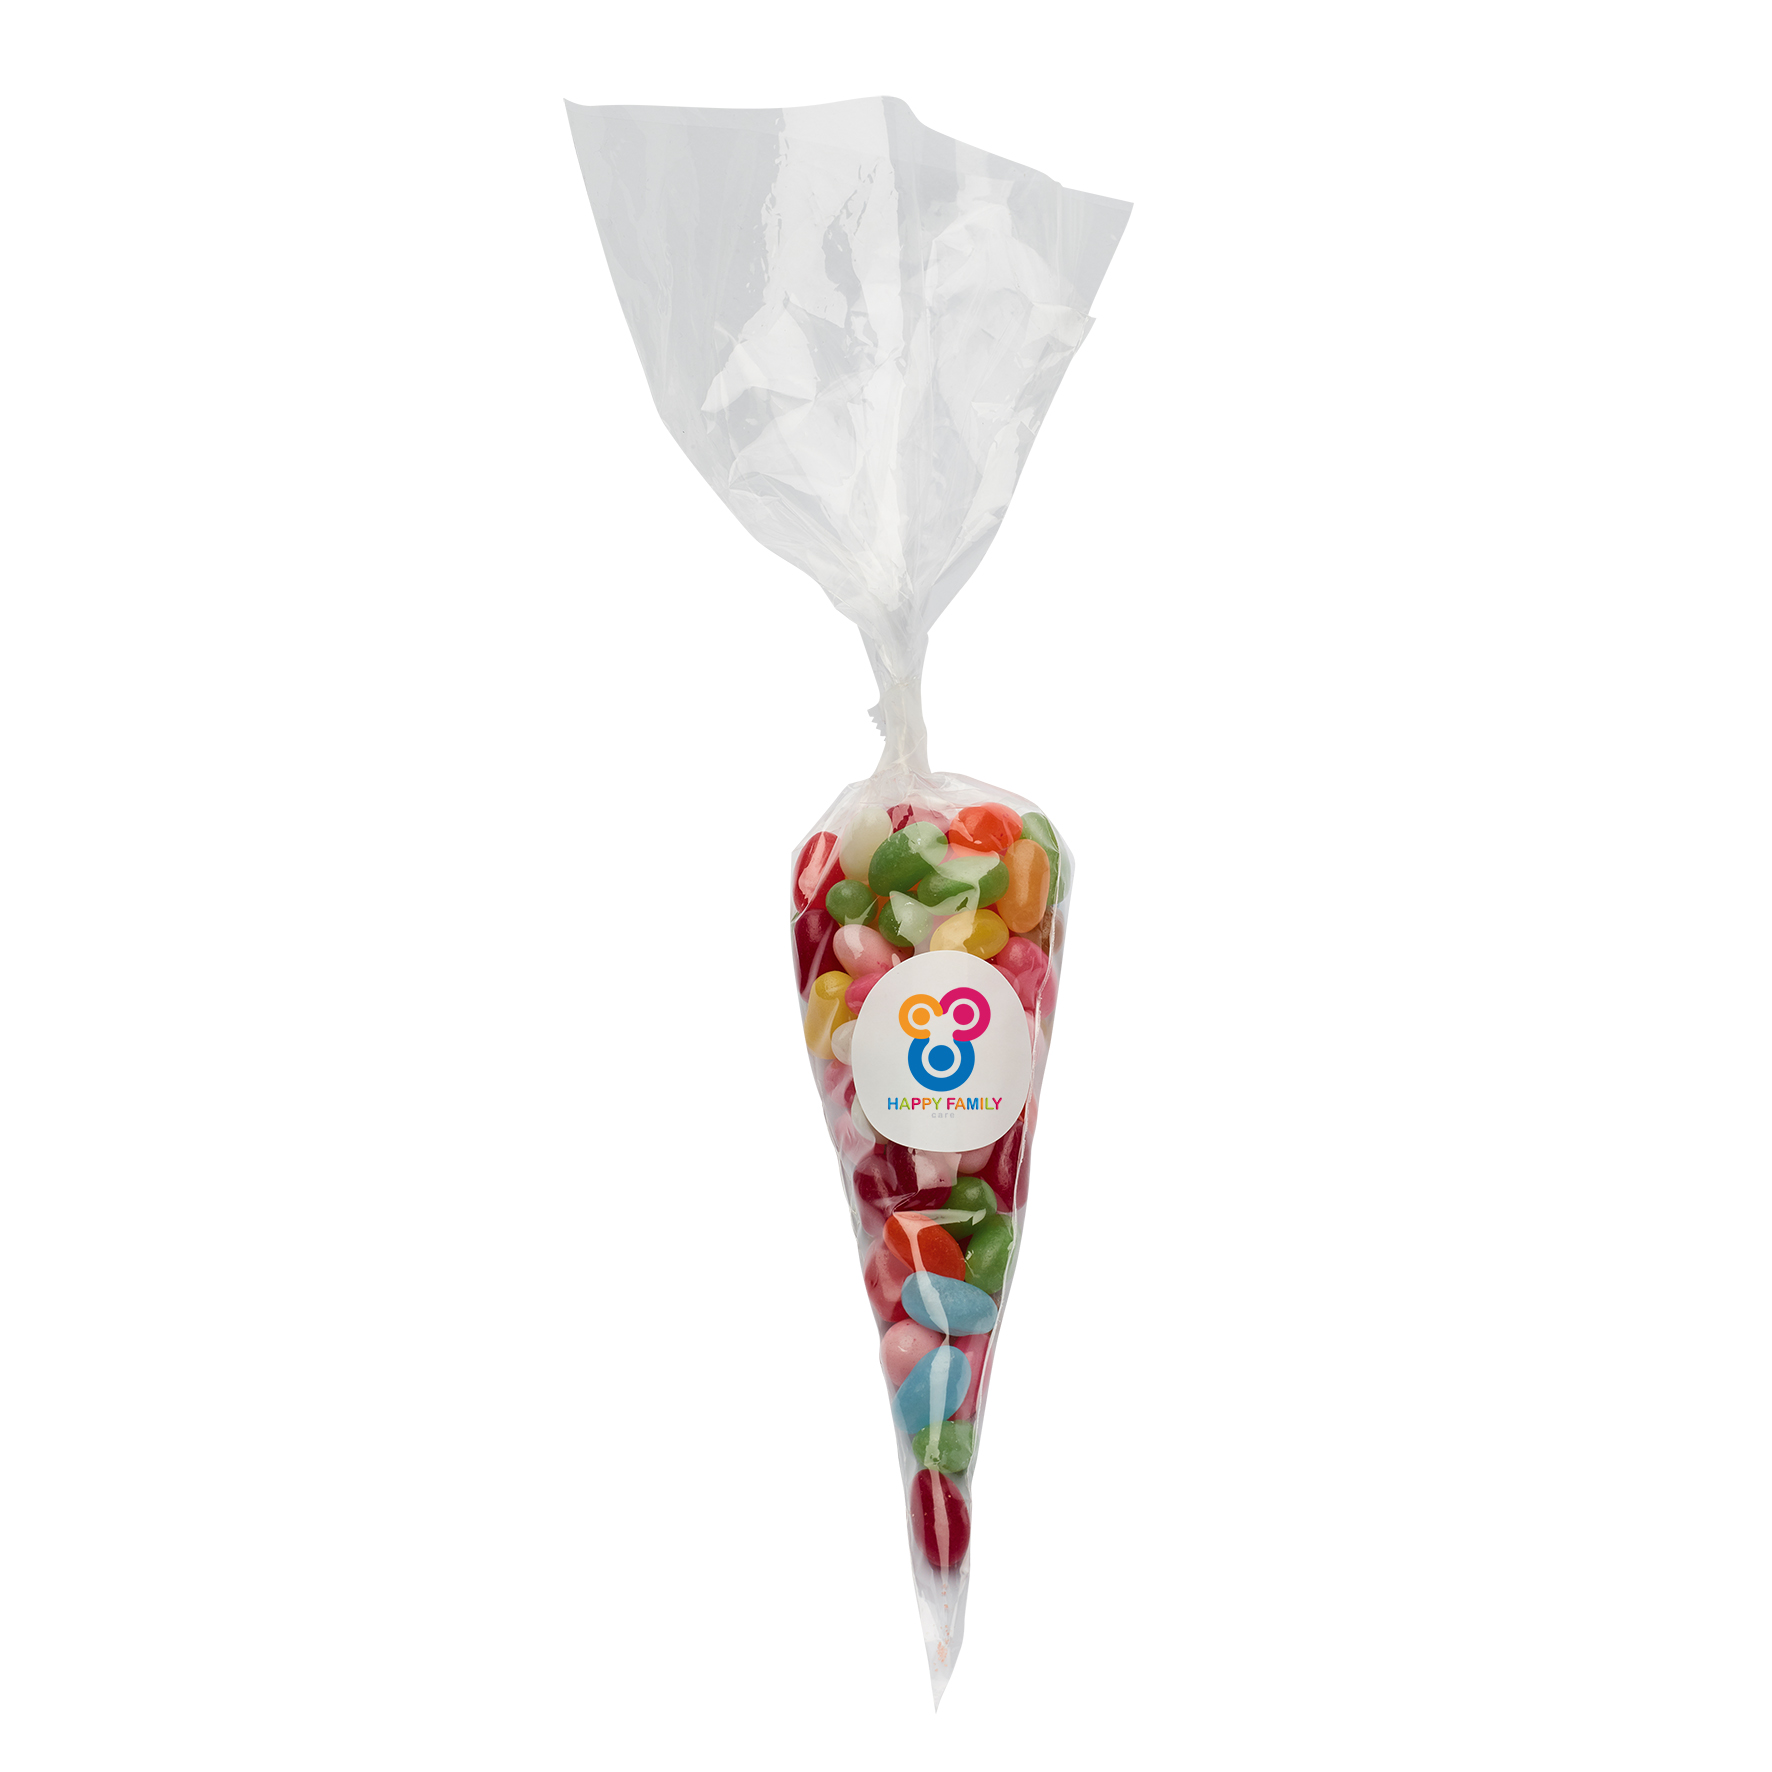 c 0605jb 00 09 - Sweet cones with jelly beans (200g)